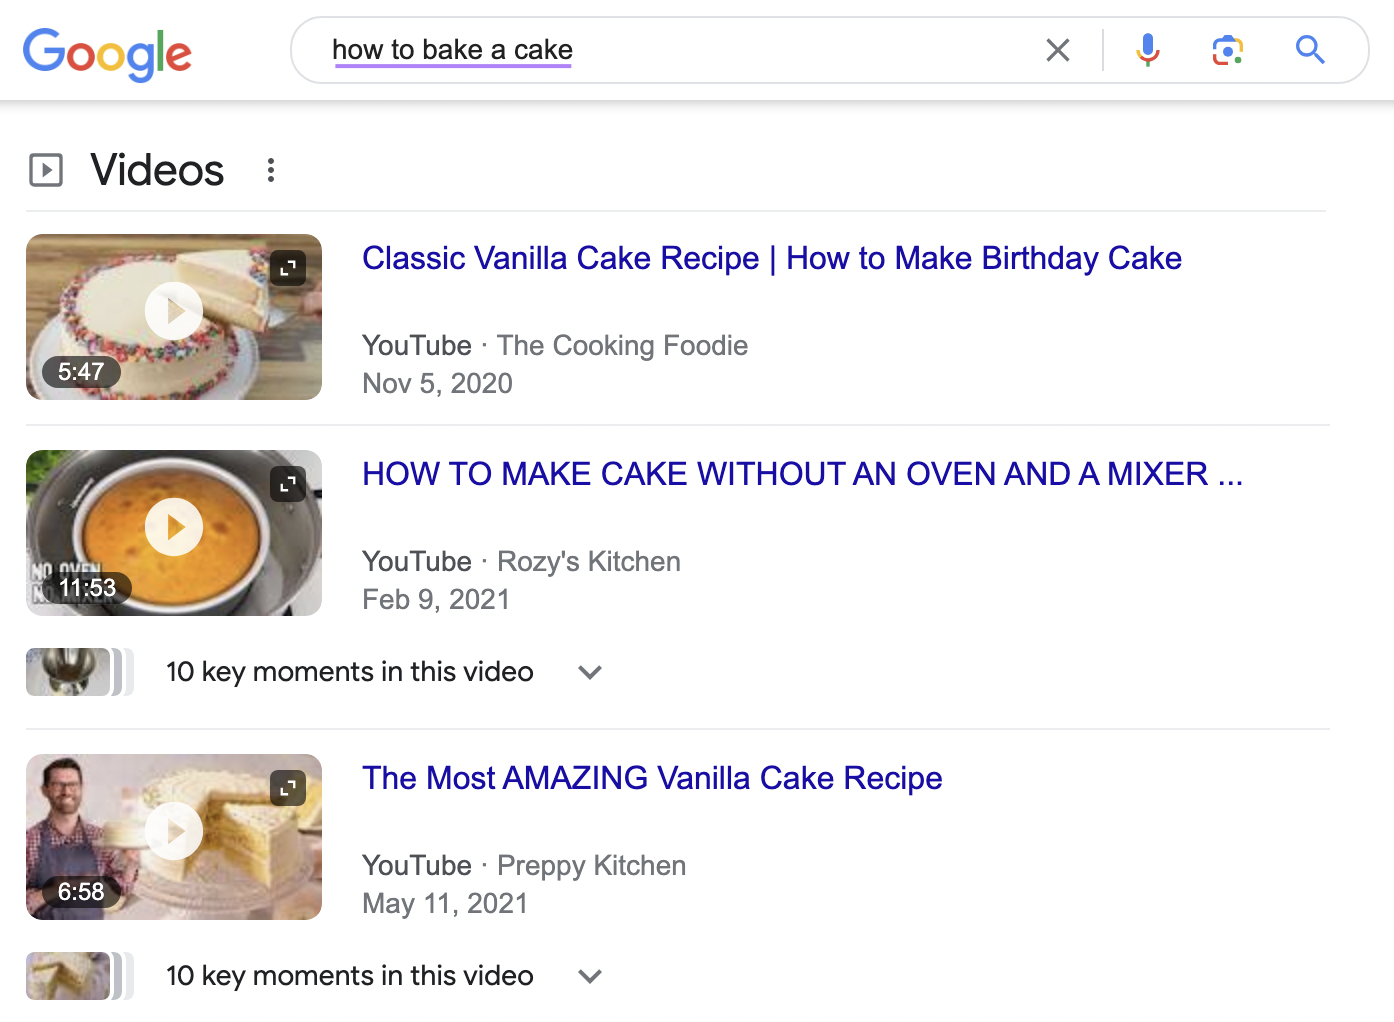 Google "Videos" results for “how to bake a cake”